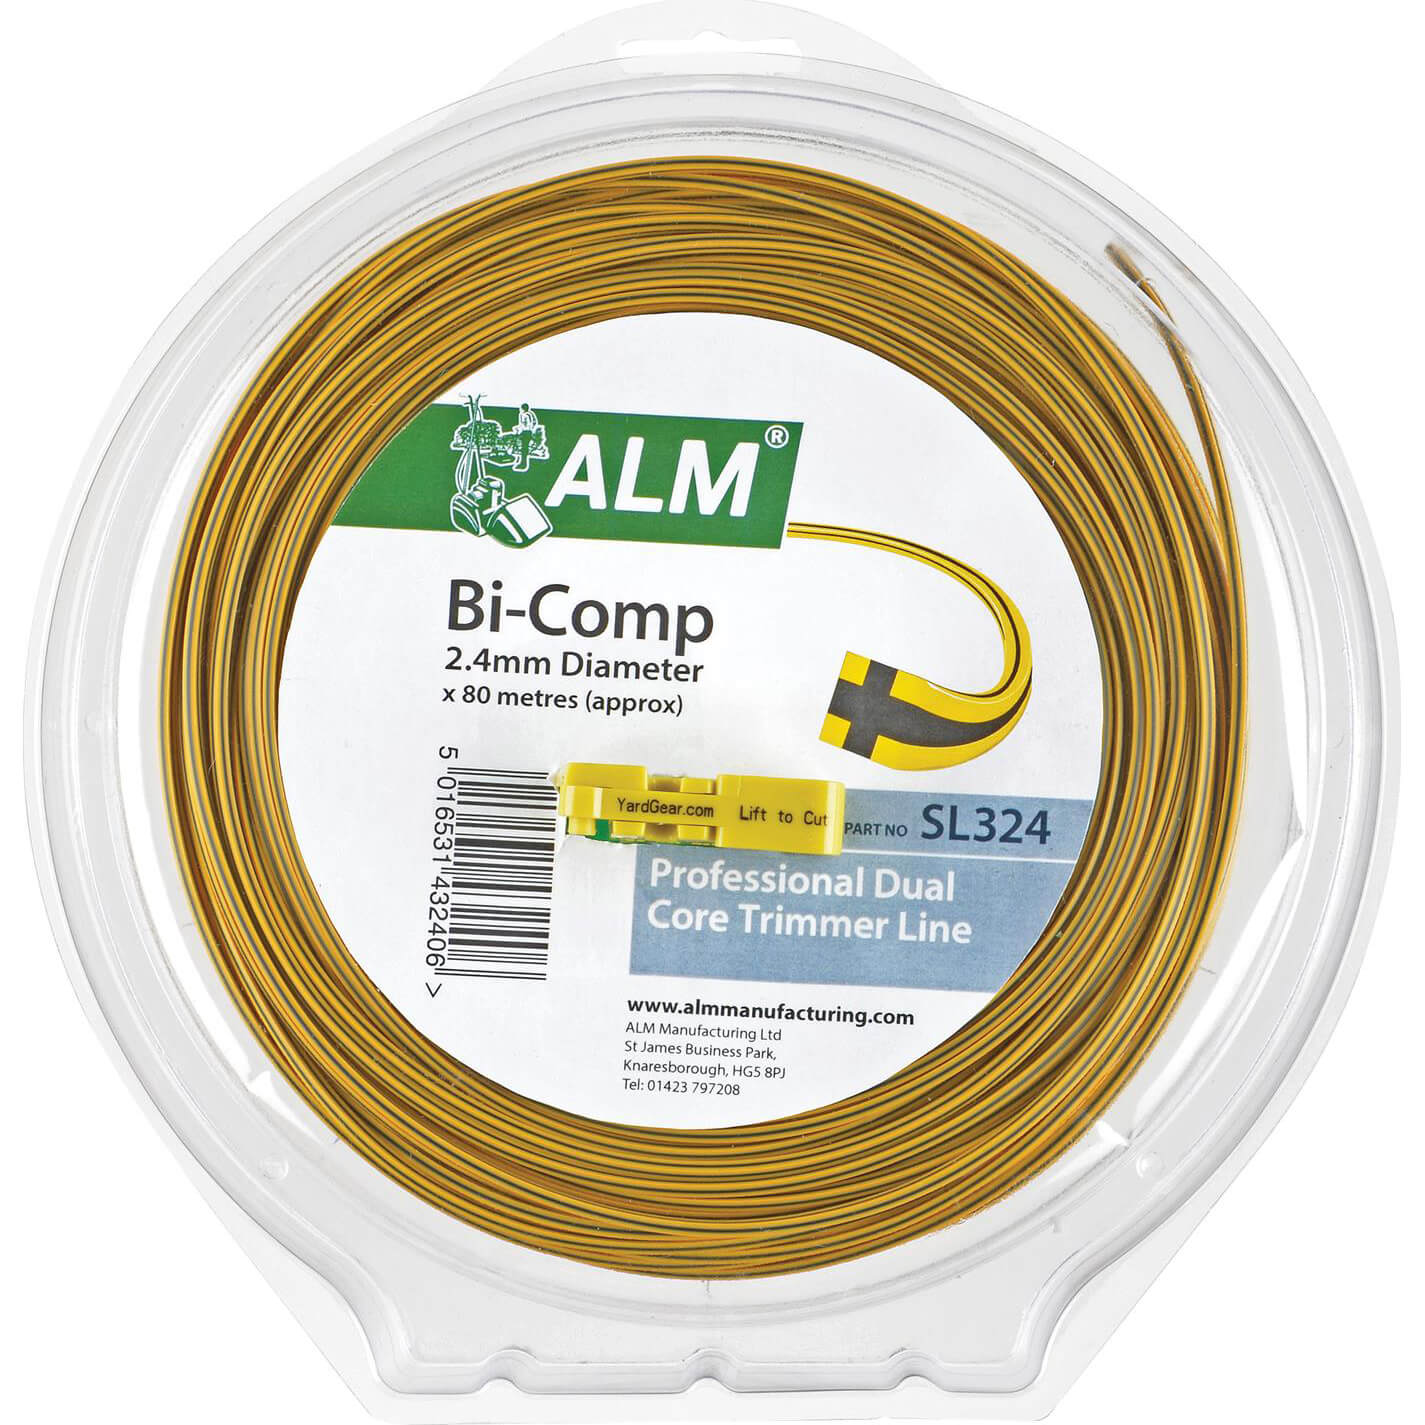 Photos - Lawn Mower ALM SL324 Replacement Bi-Component Square Grass Trimmer Line 2.4mm x 80m f 